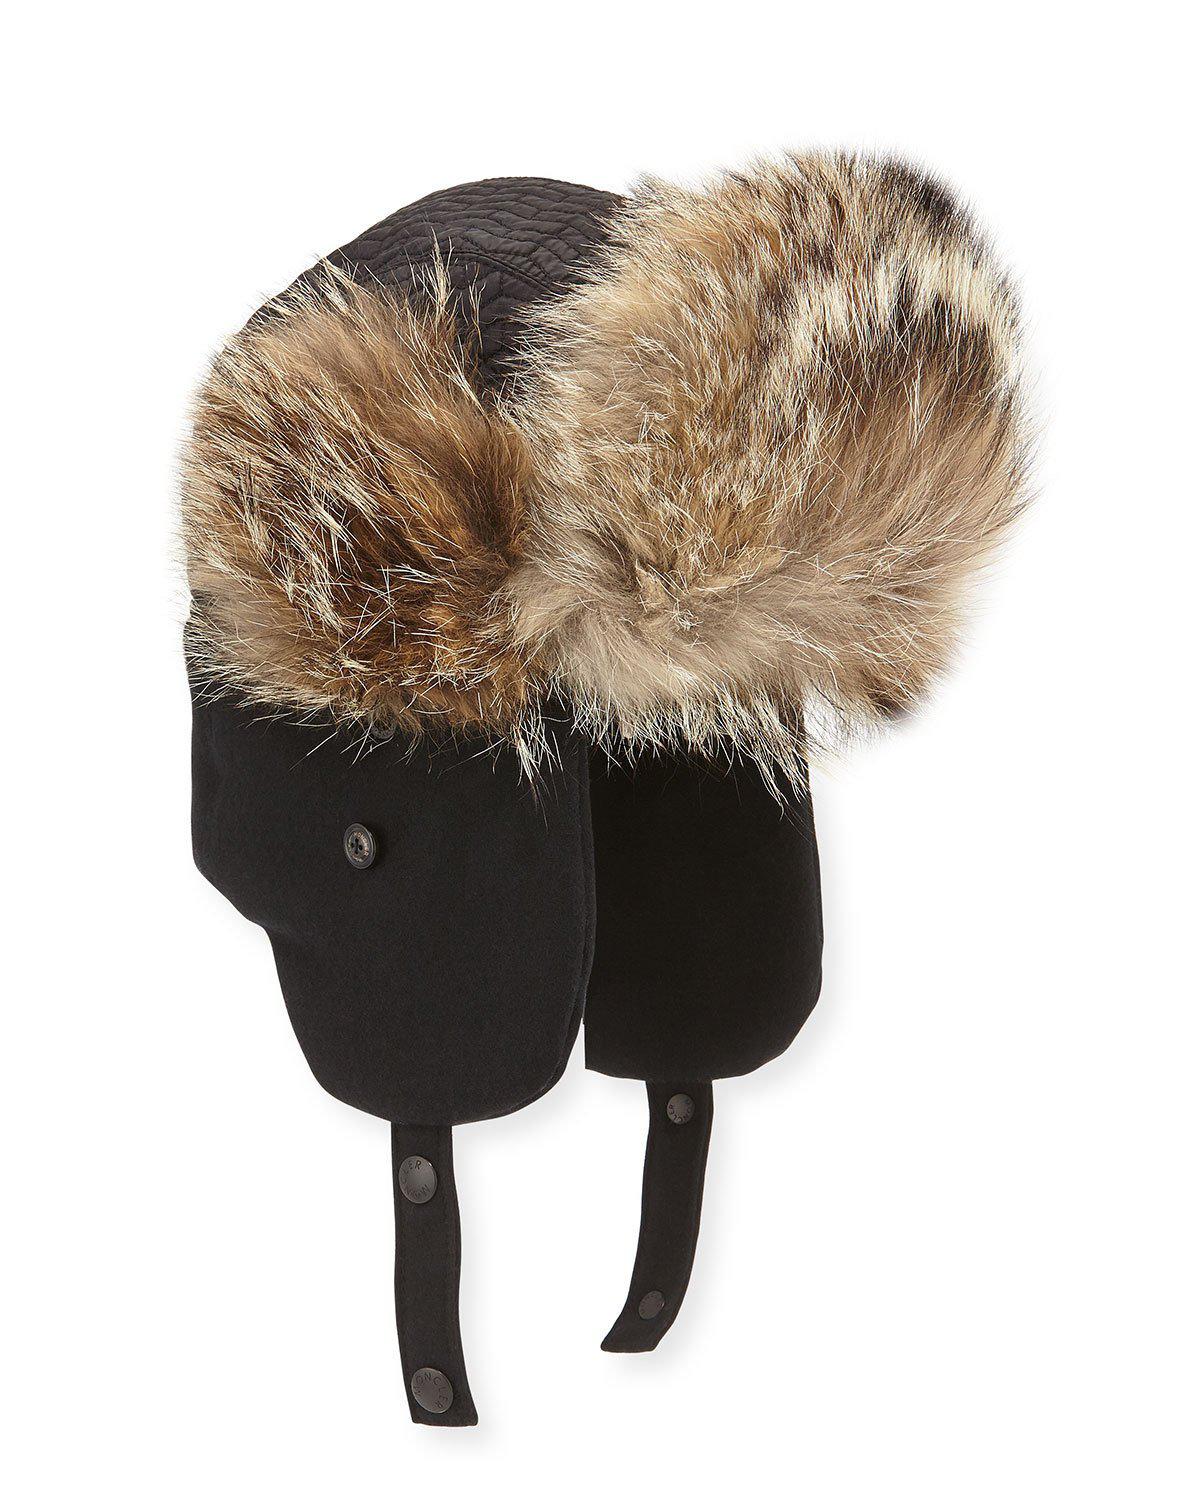 moncler aviator hat off 51% - axnosis.co.uk